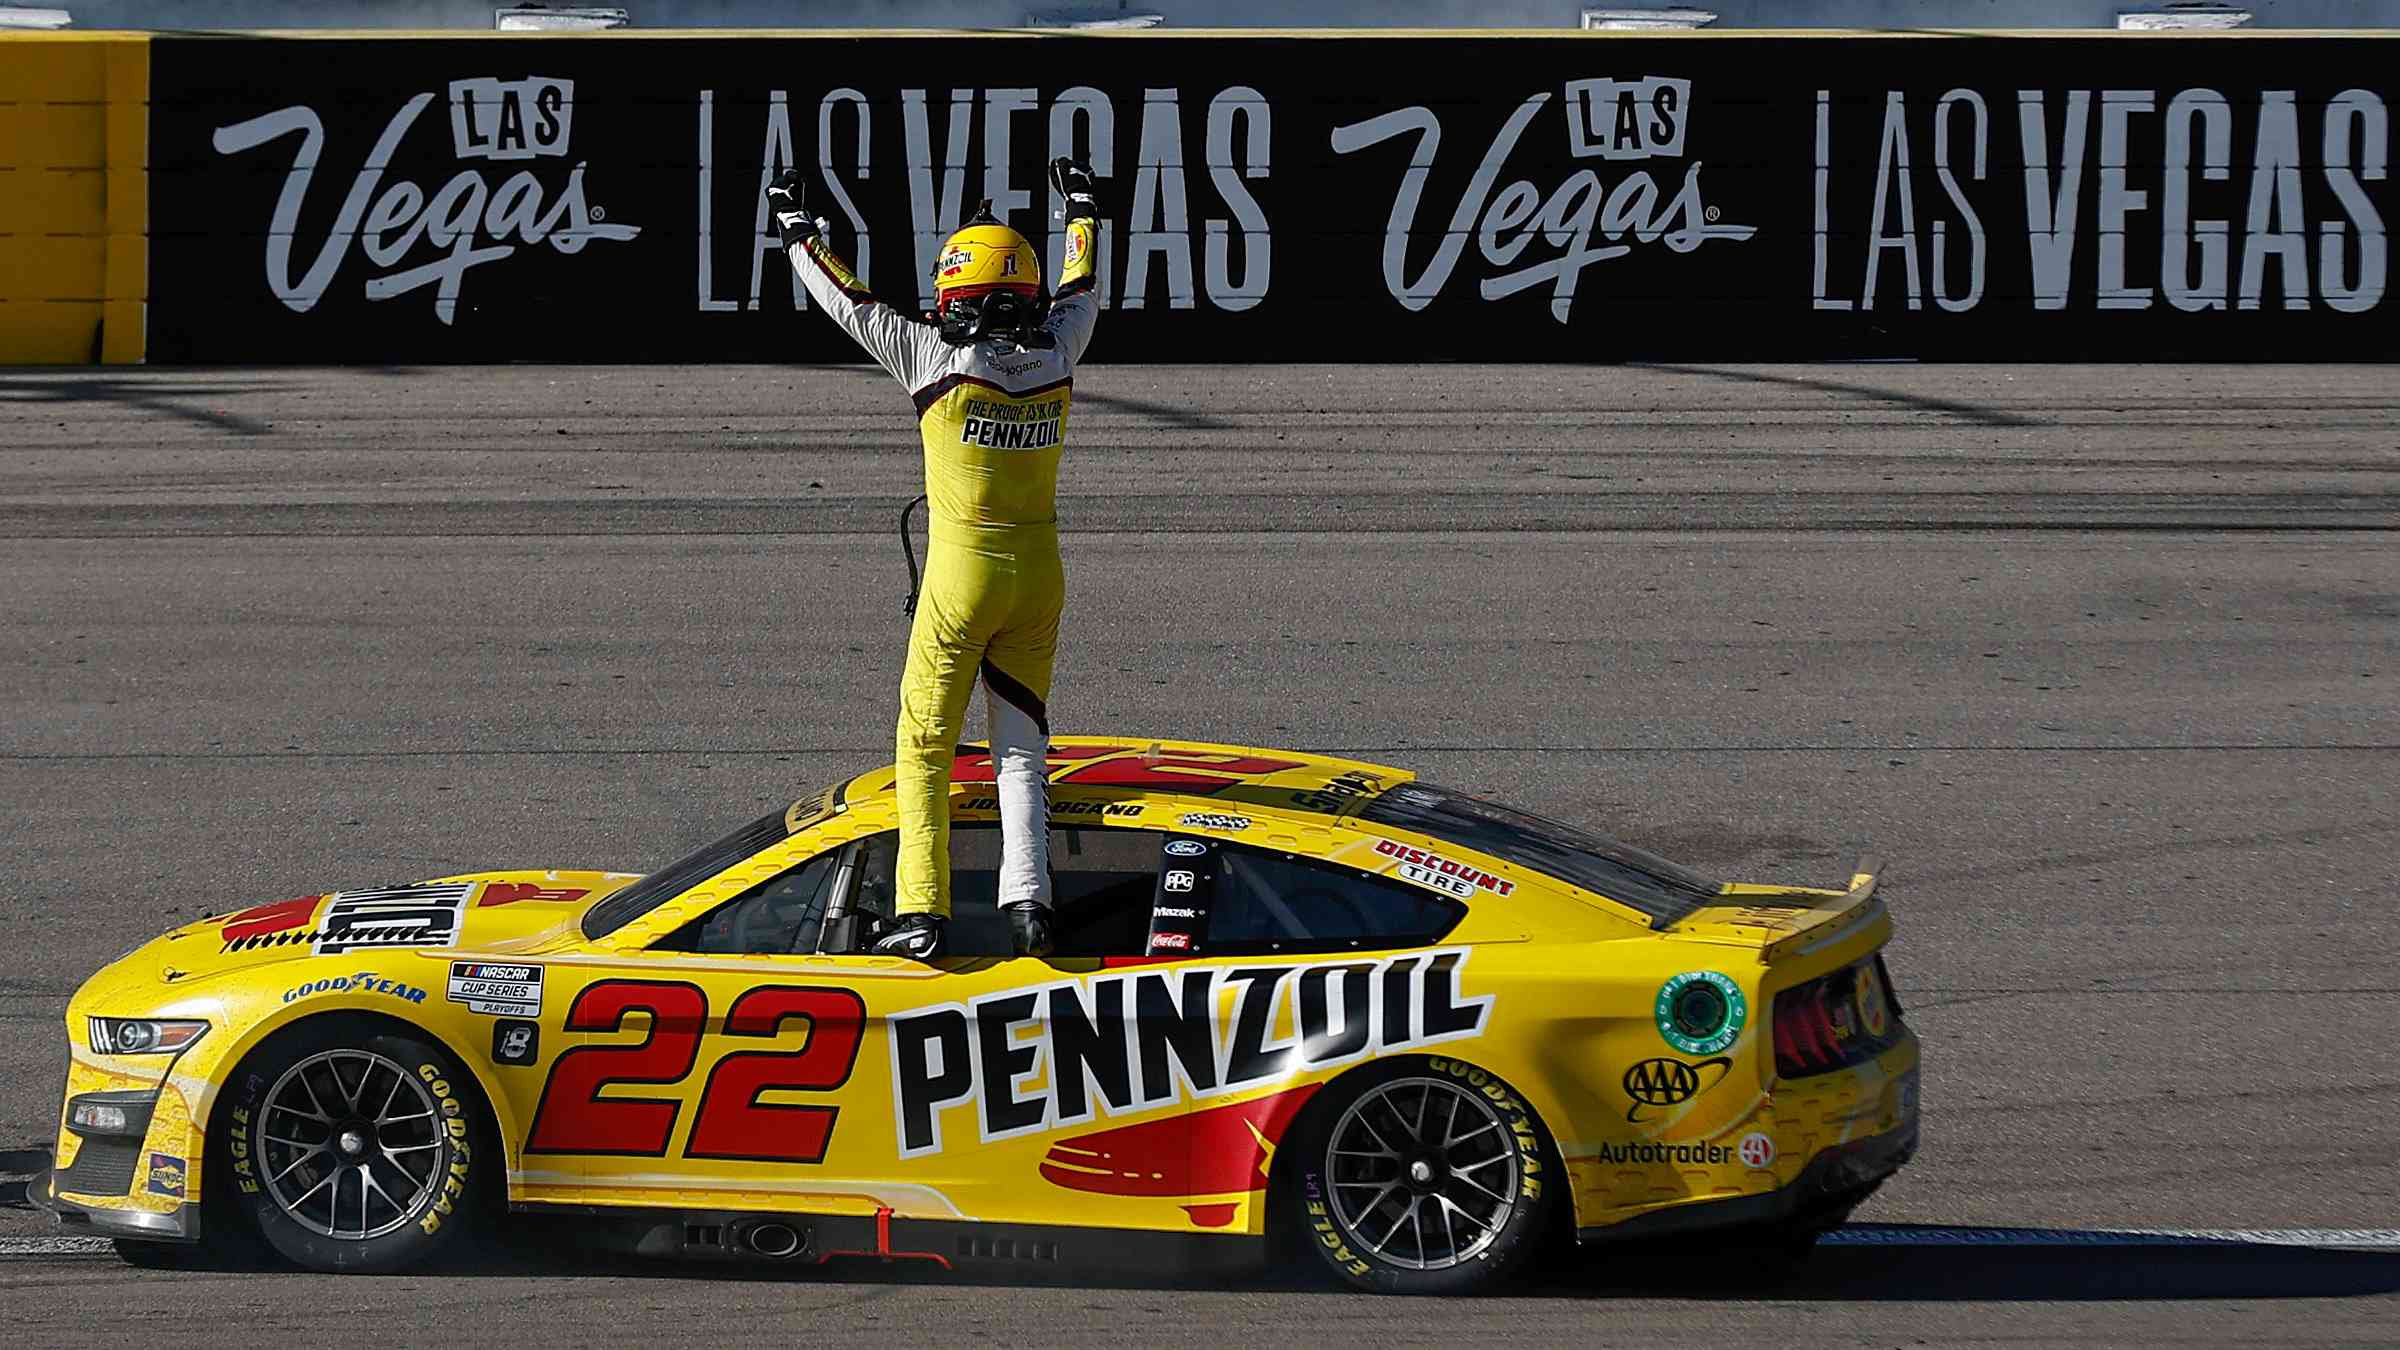 NASCAR Power Rankings: Joey Logano Finishes on Top After Championship Win